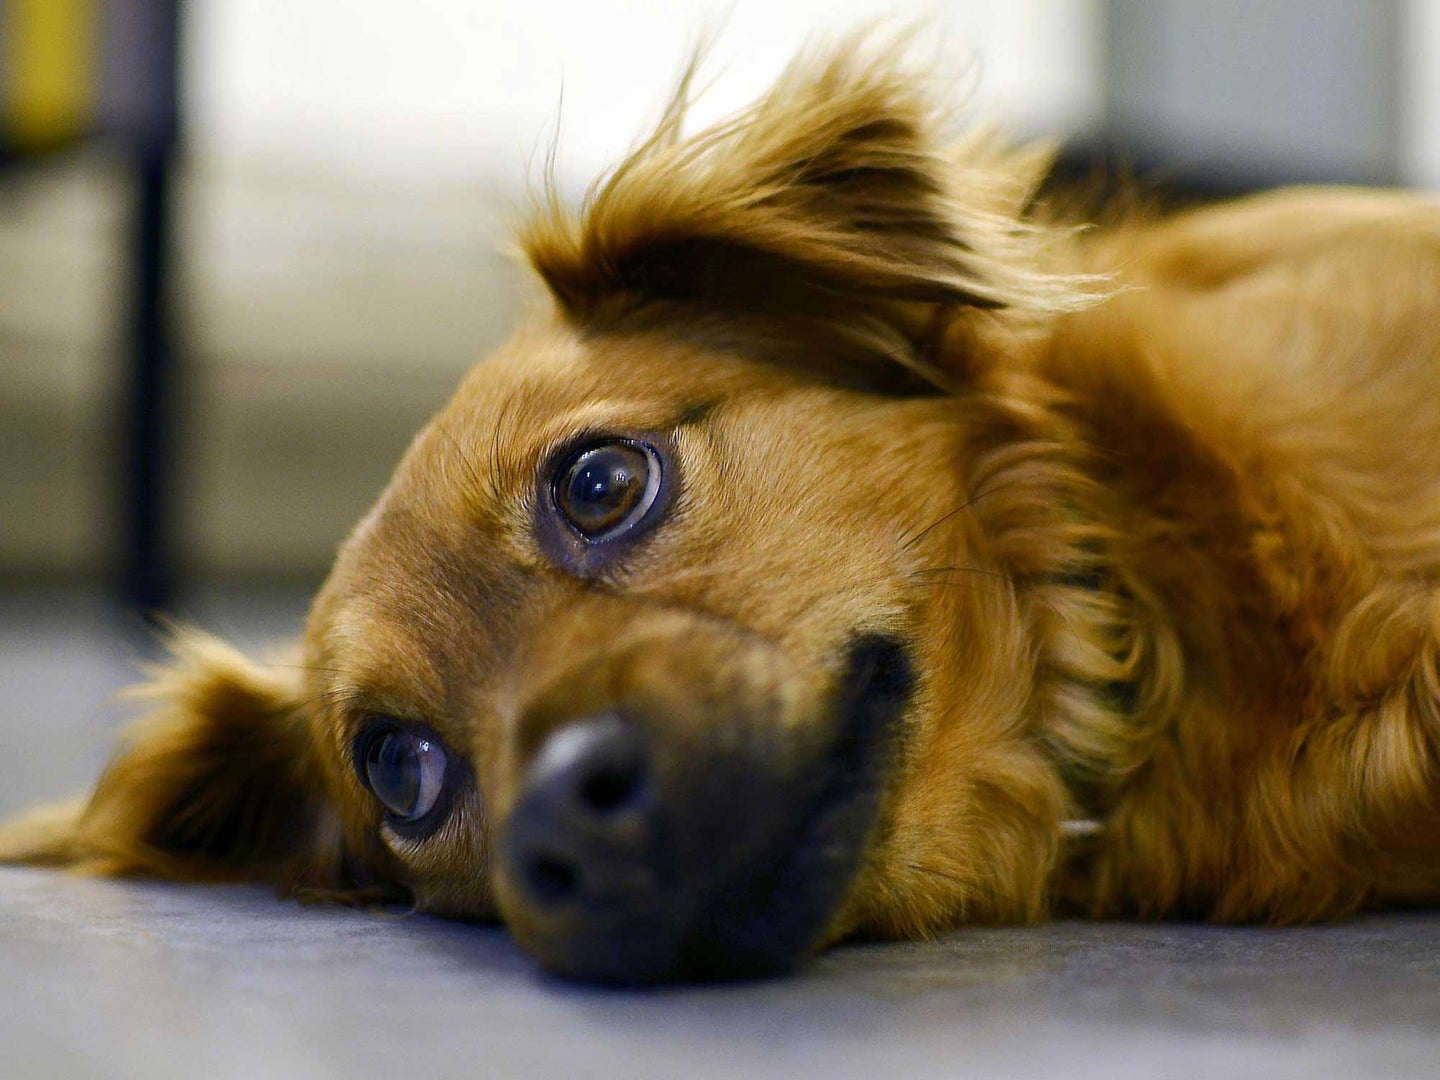 Dogs reportedly trained with aversive tools were more “pessimistic” than dogs that were not.